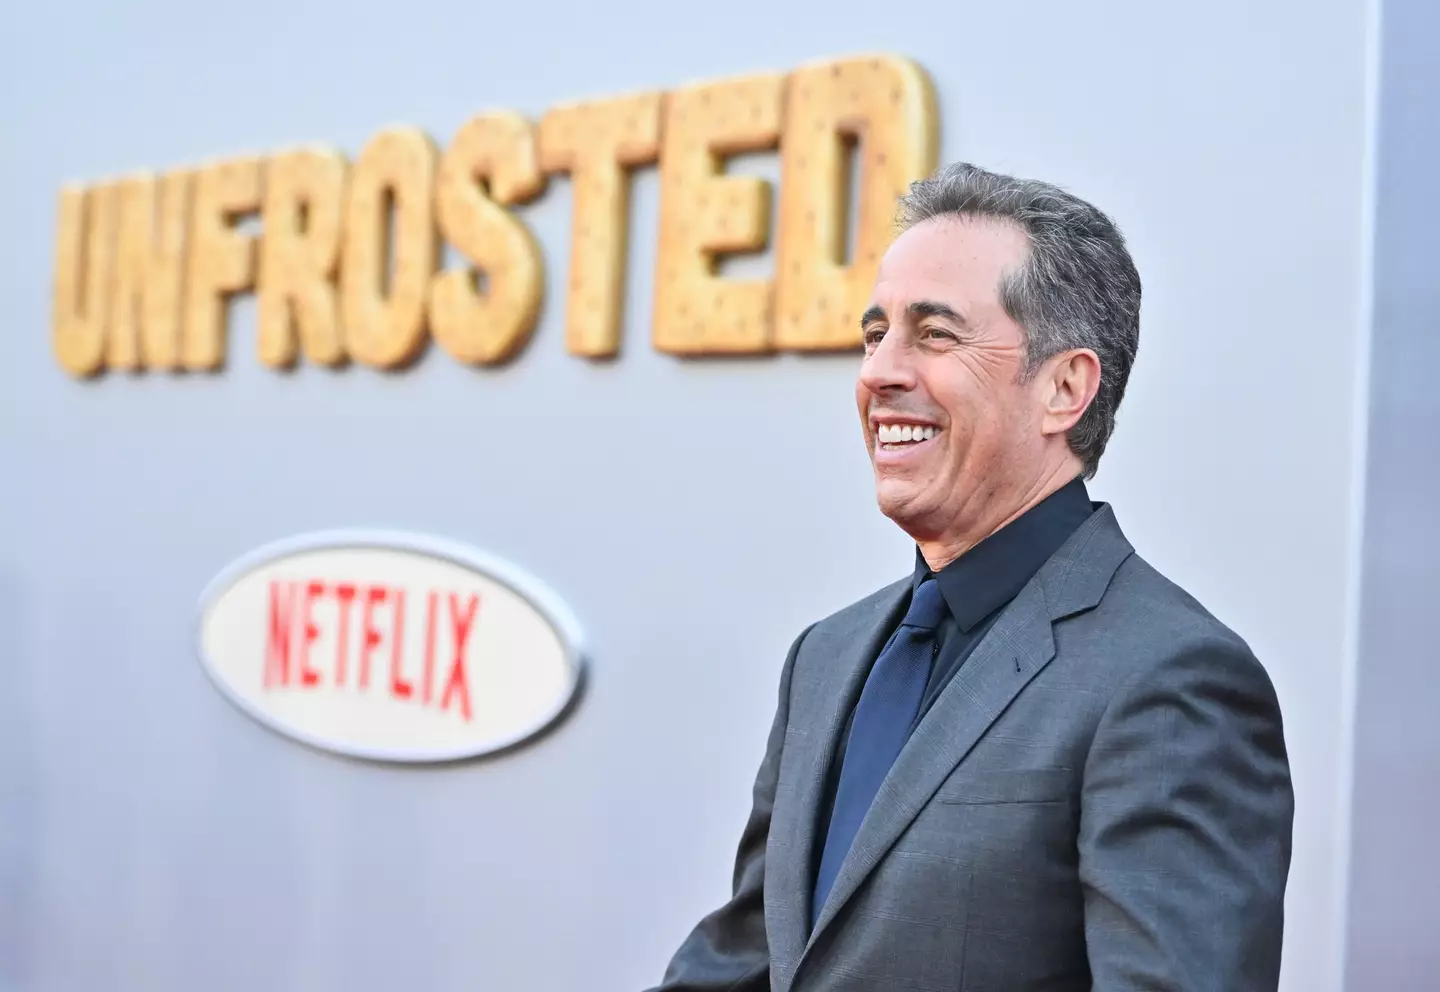 Jerry Seinfeld at the premiere of Netflix's Unfrosted last month (Charley Gallay/Getty Images for Netflix)